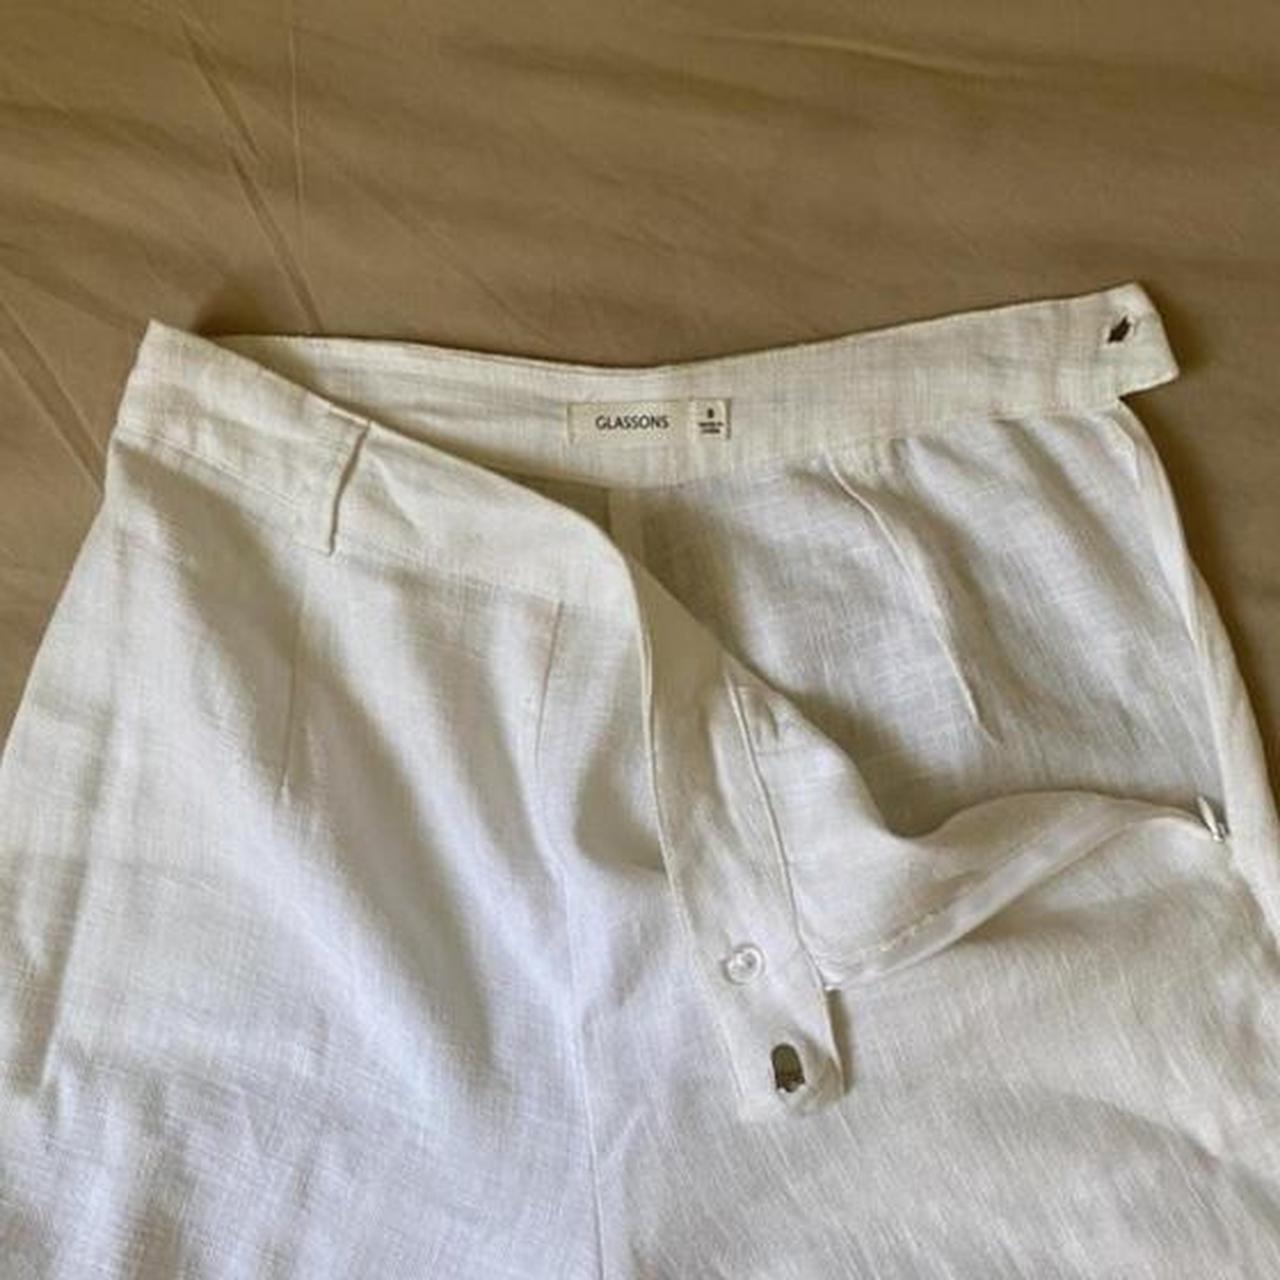 Glassons white linen pants. Repop. Were too long for... - Depop